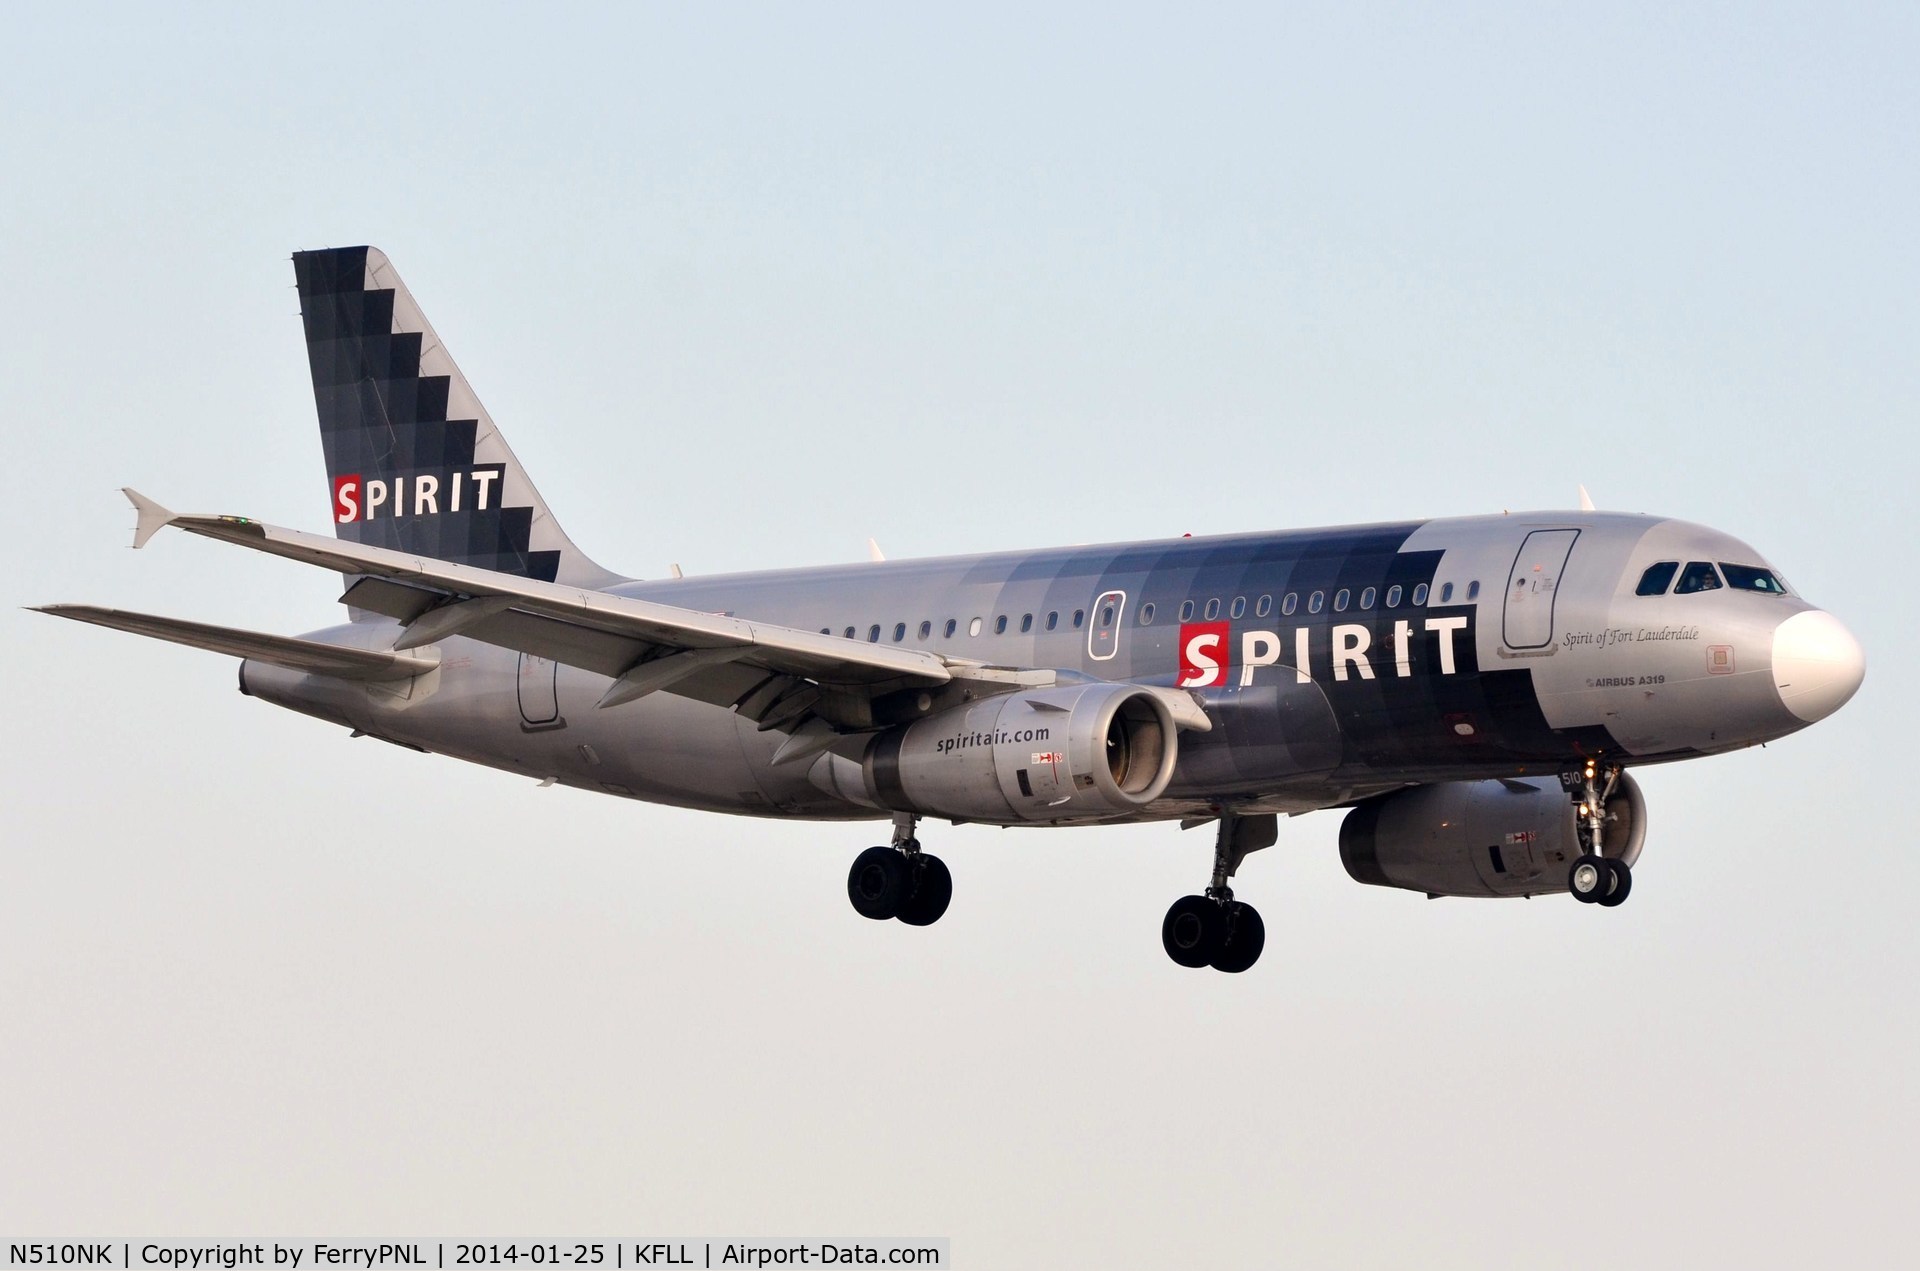 N510NK, 2005 Airbus A319-132 C/N 2622, Spirit A319 still in old colors